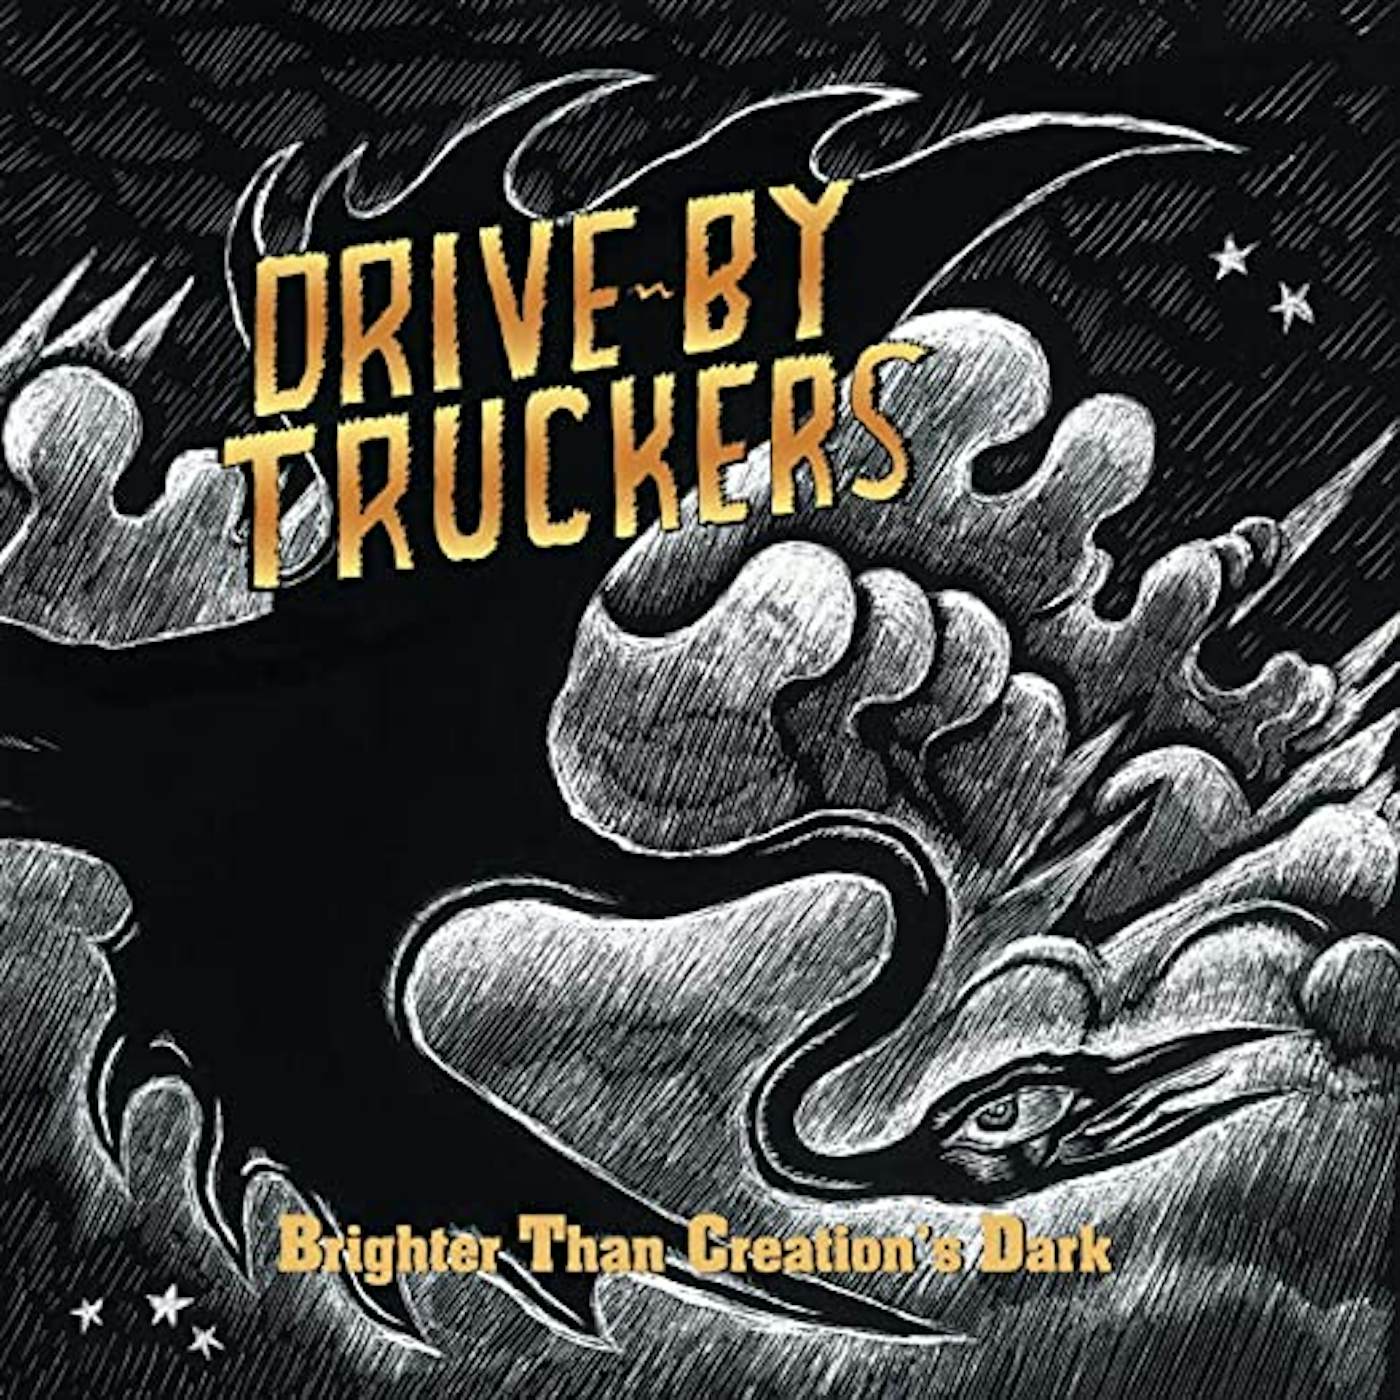 Drive-By Truckers Brighter Than Creation's Dark vinyl record